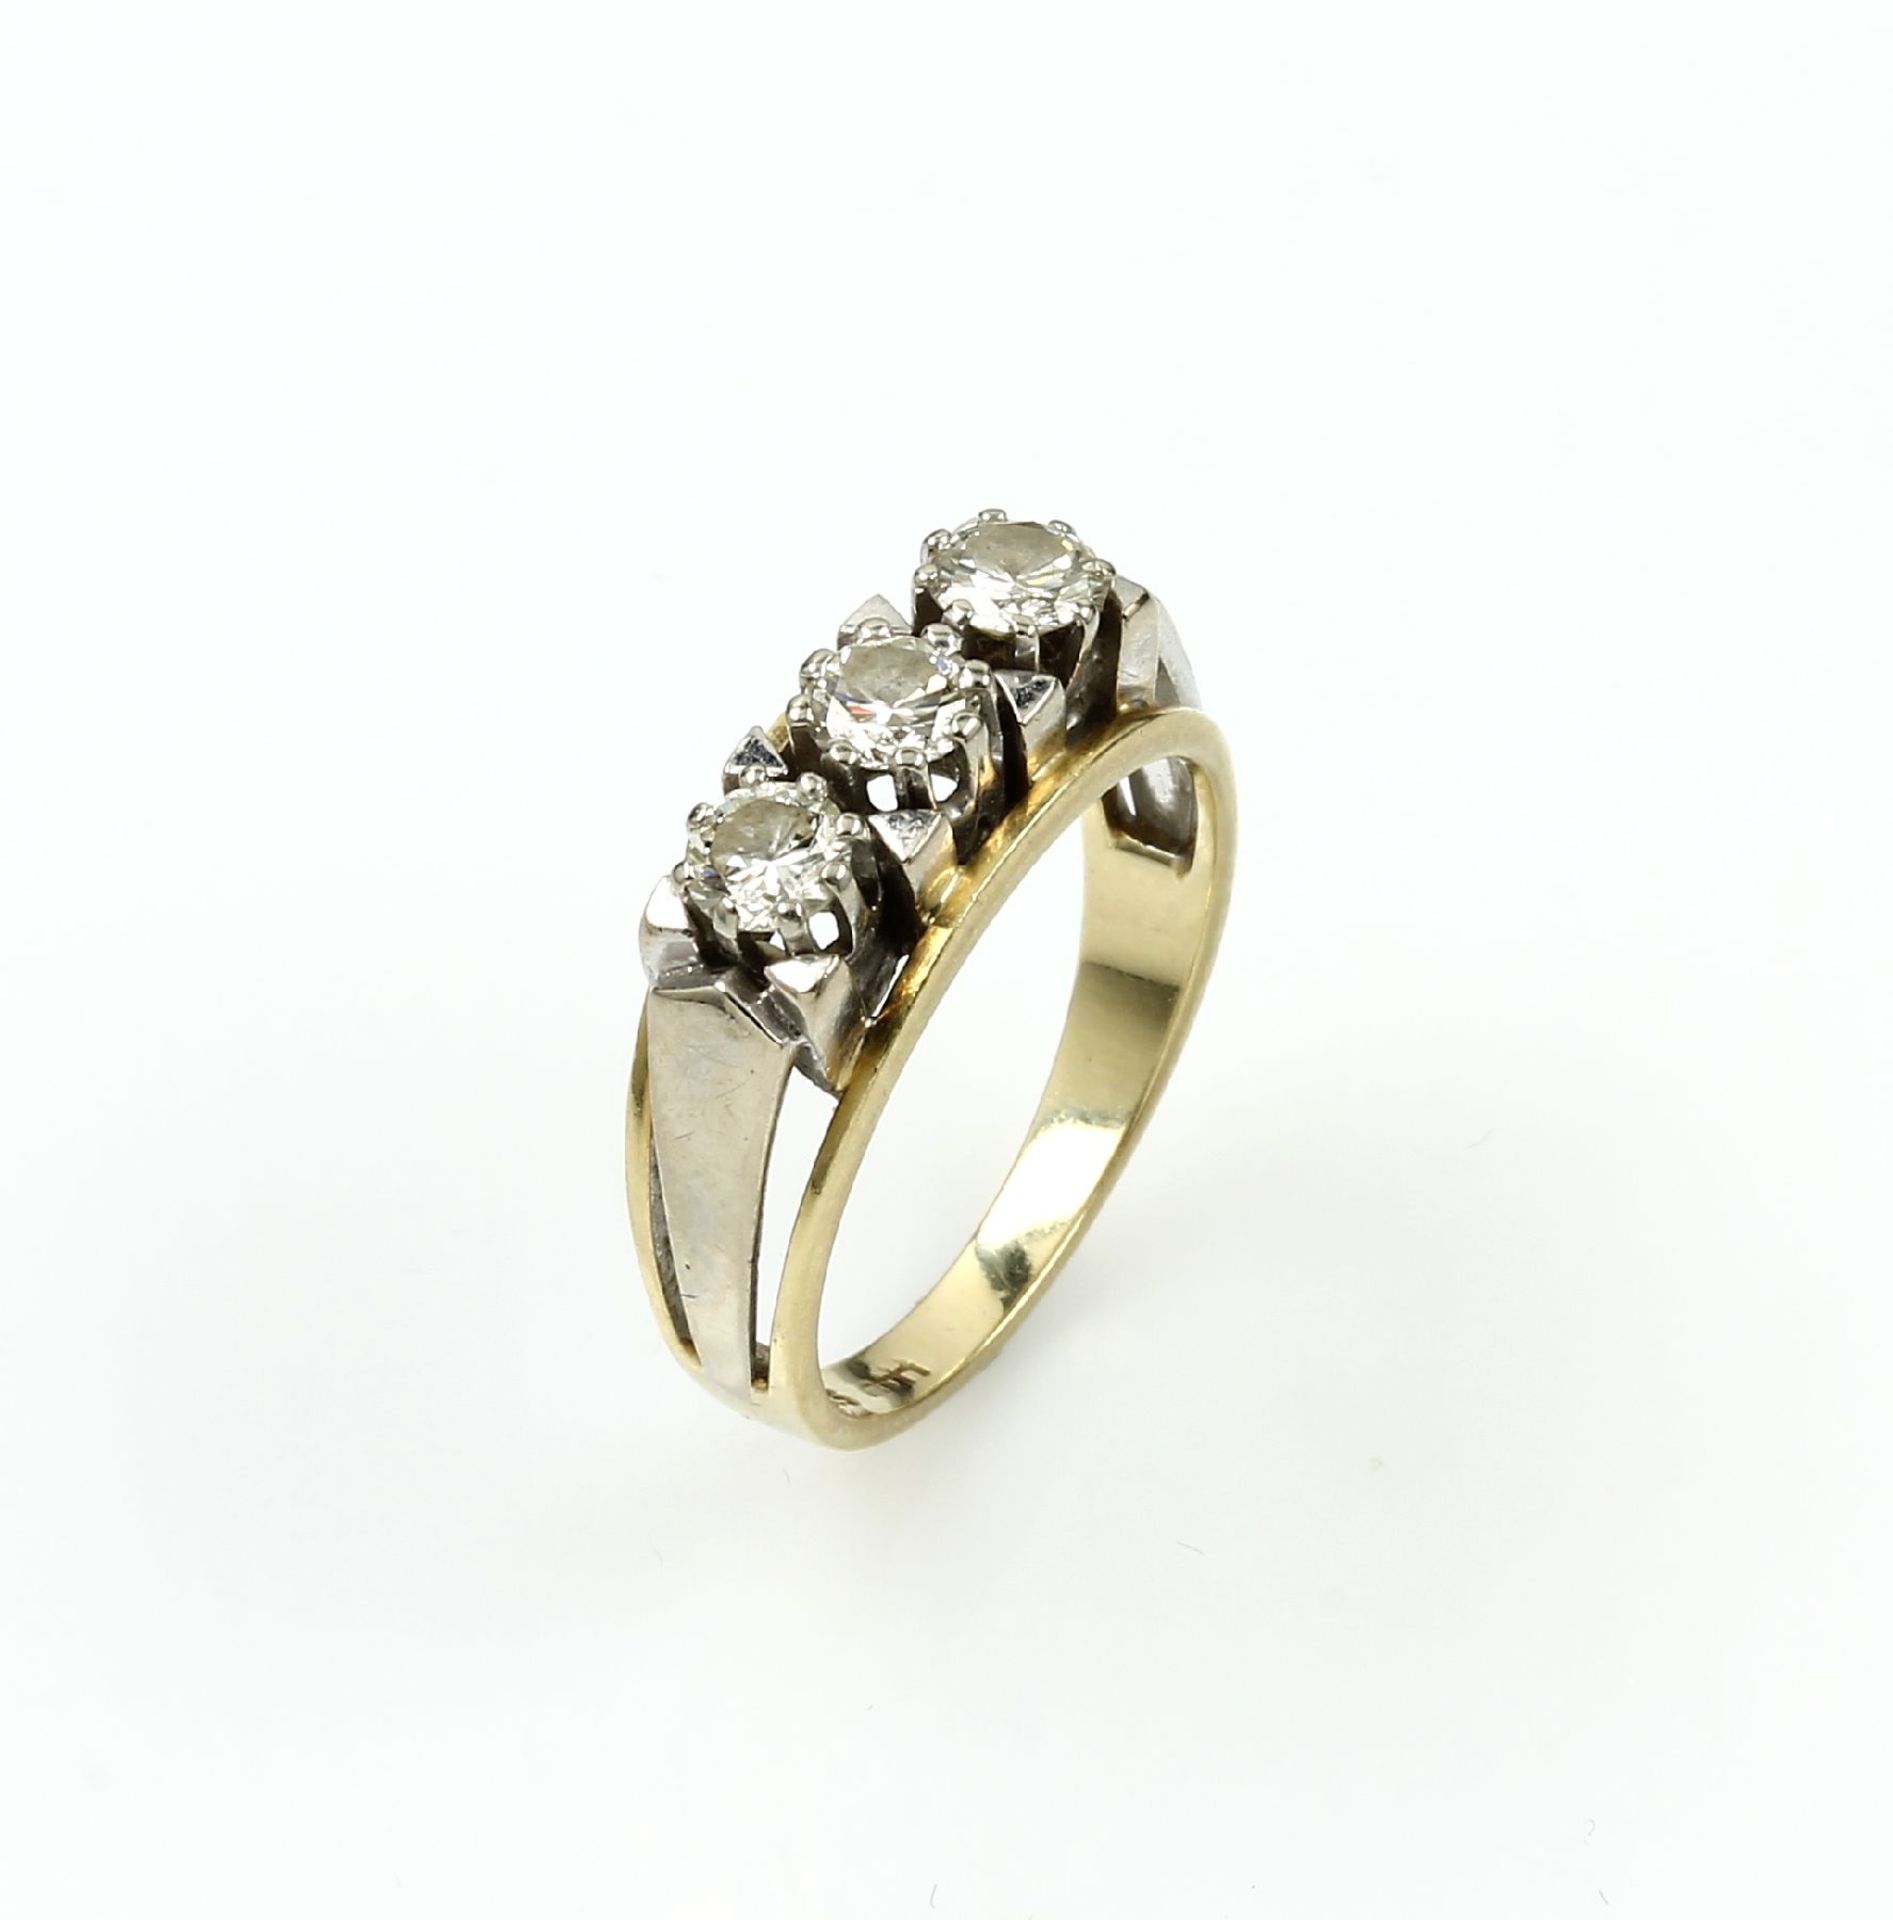 14 kt gold ring with brilliants , YG/WG 585/000, in WG setting 3 brilliants total approx. 0.75 ct